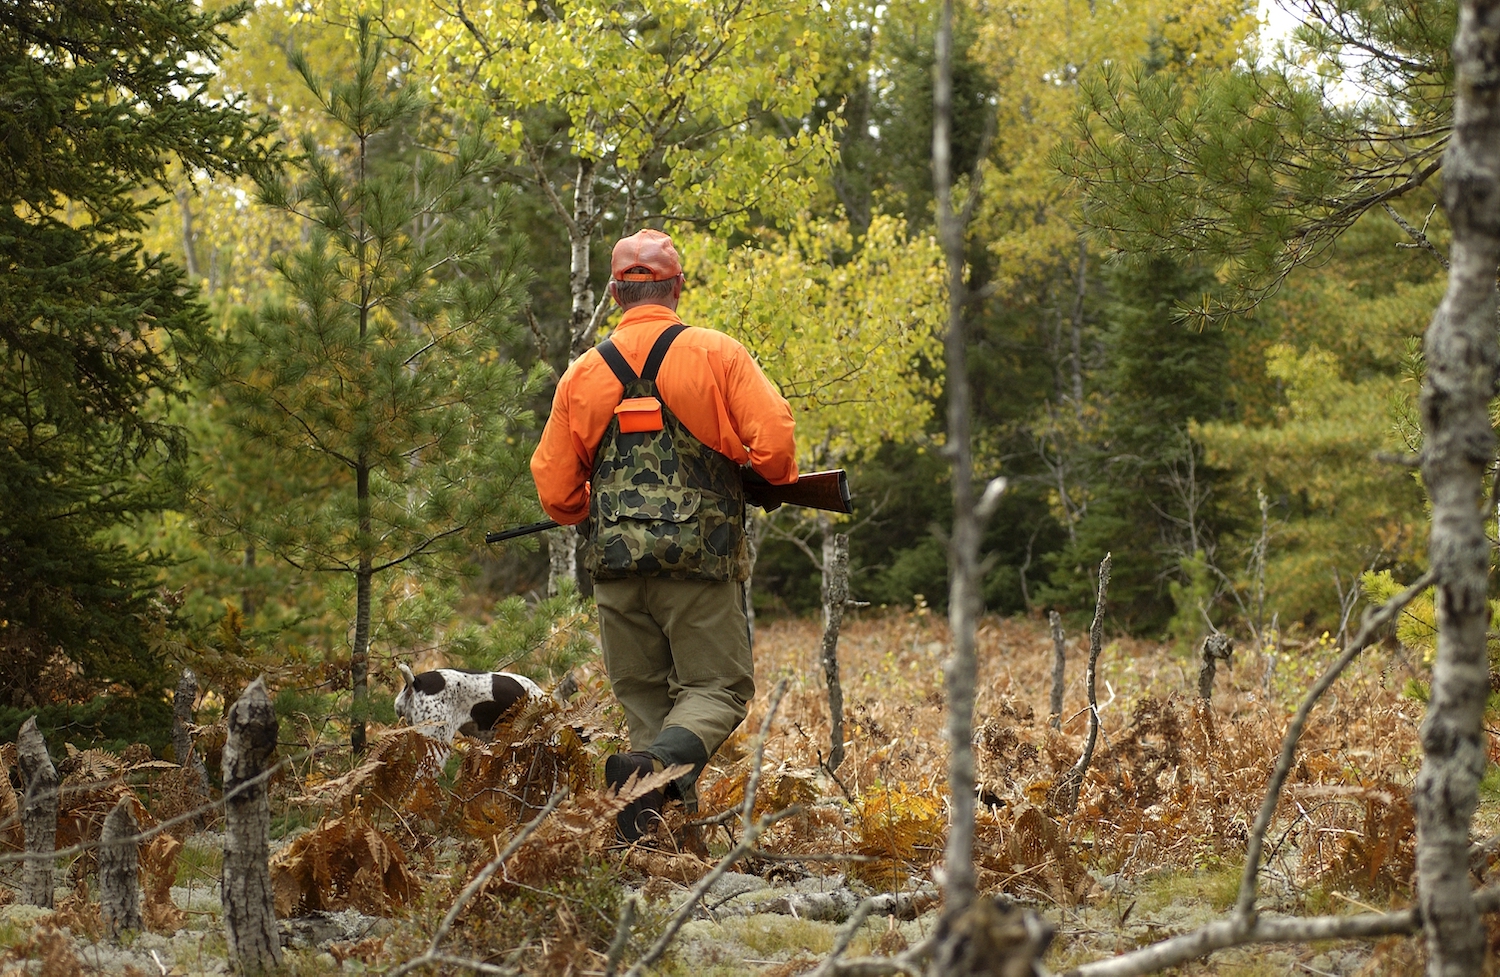 Man walks through wooded area while grouse hunting